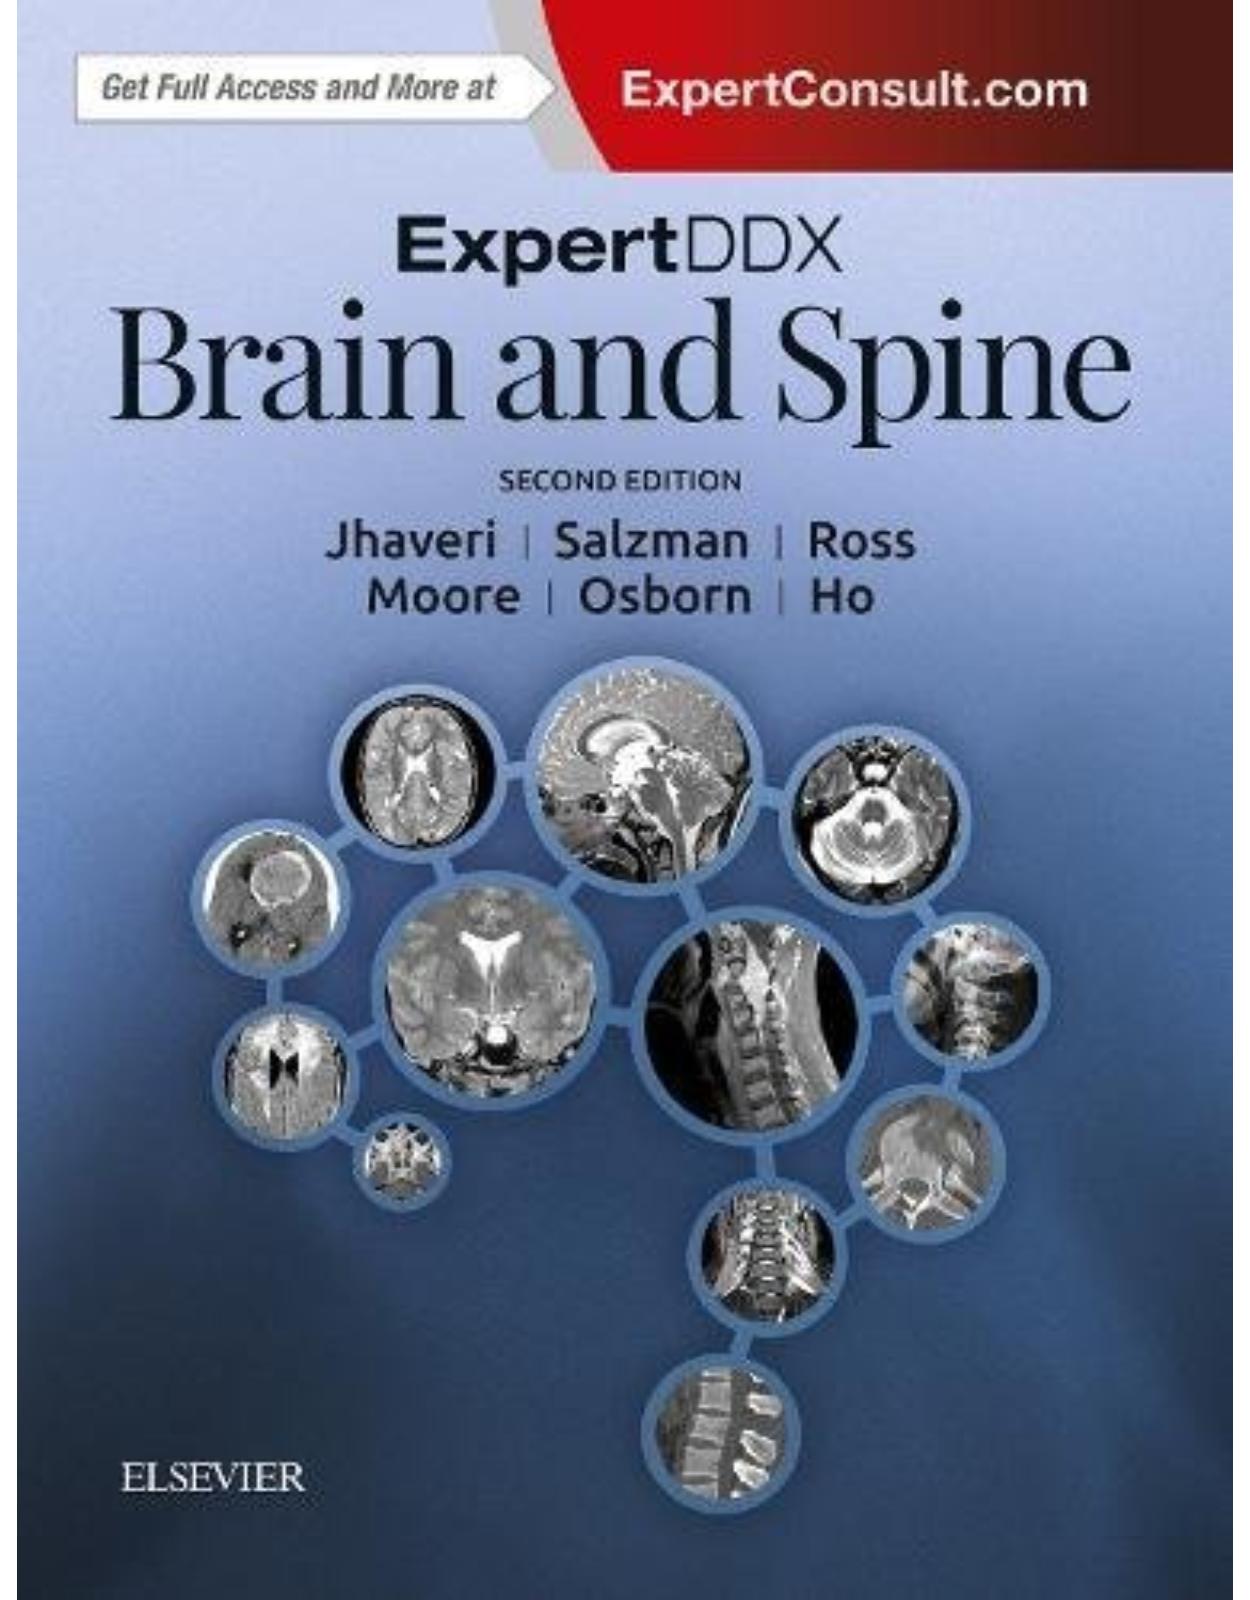 ExpertDDx: Brain and Spine, 2nd Edition